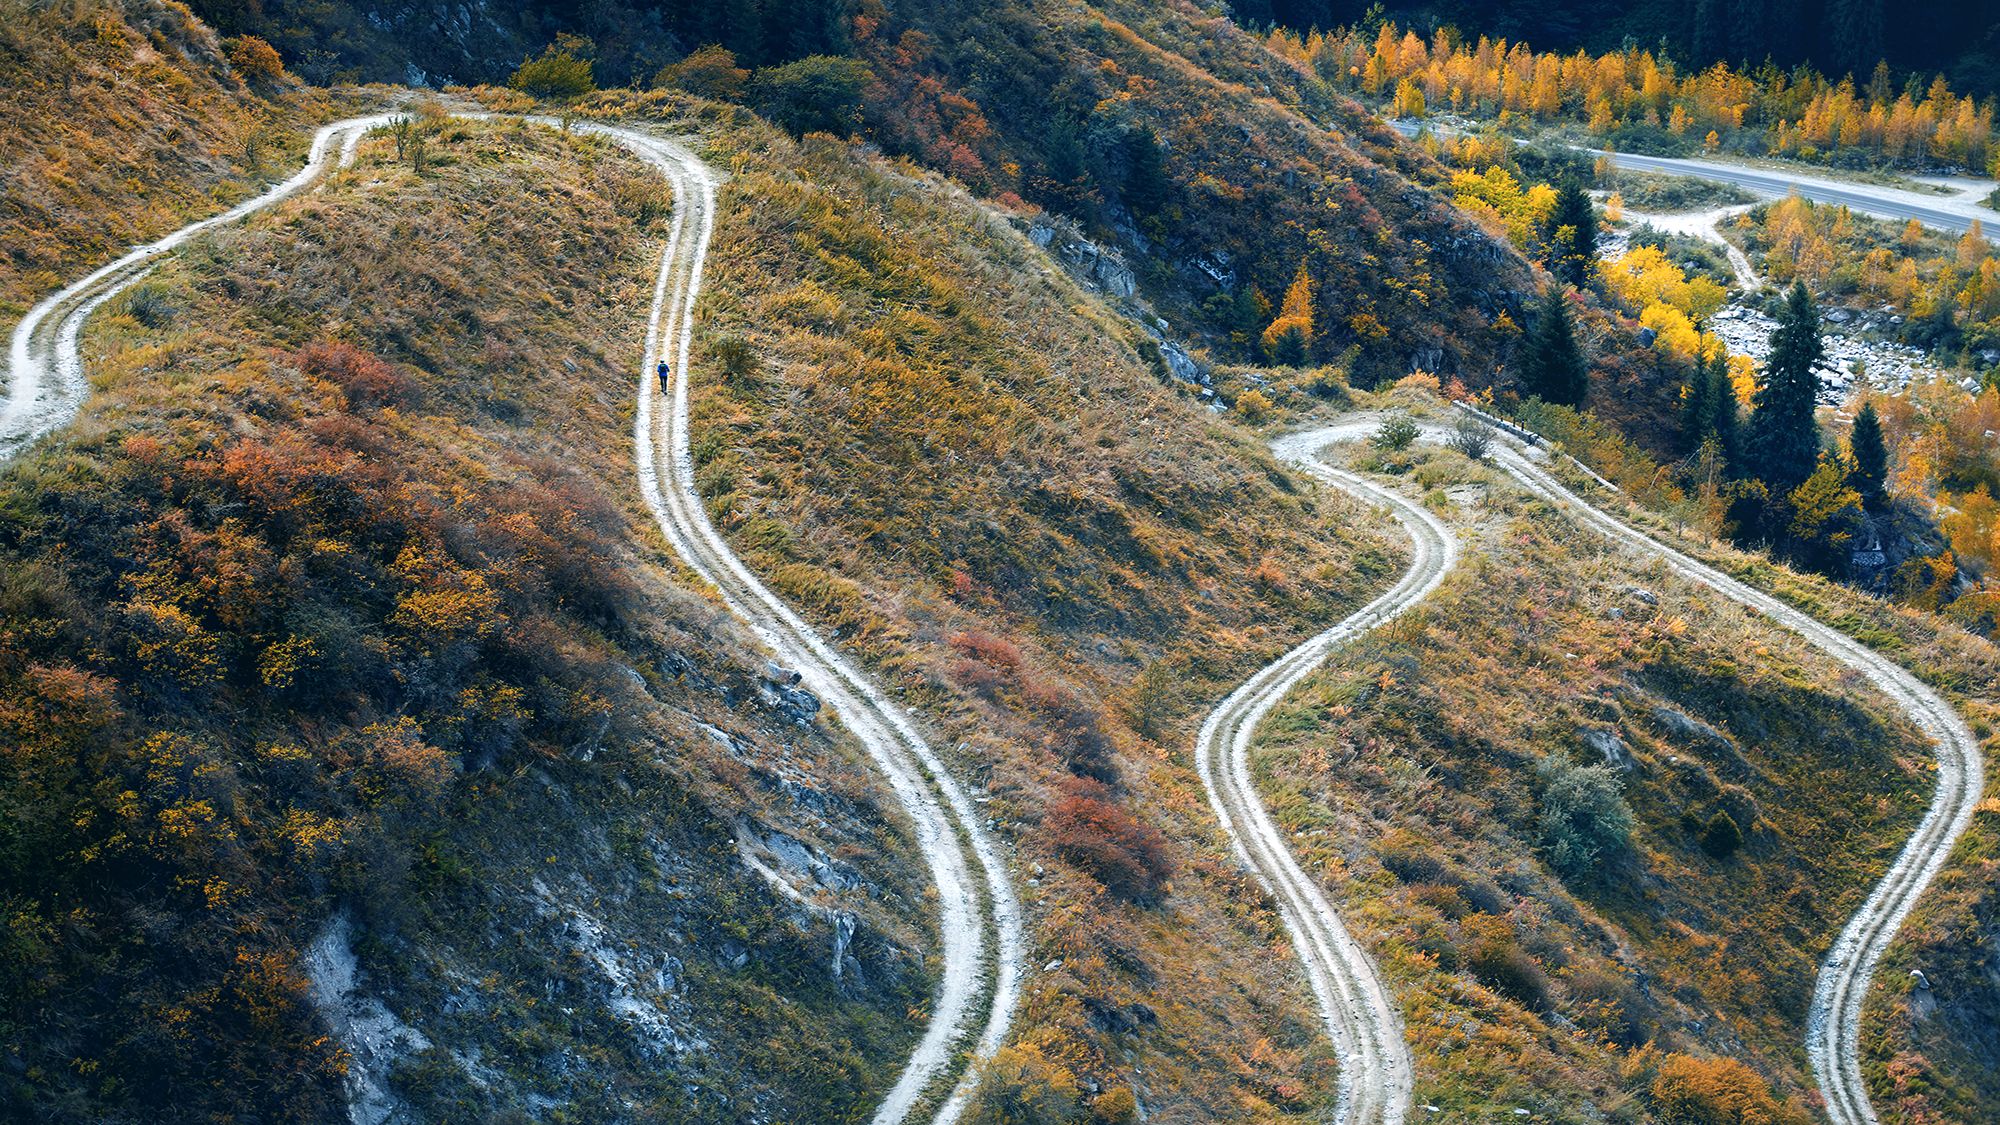 Winding roads over rolling hills